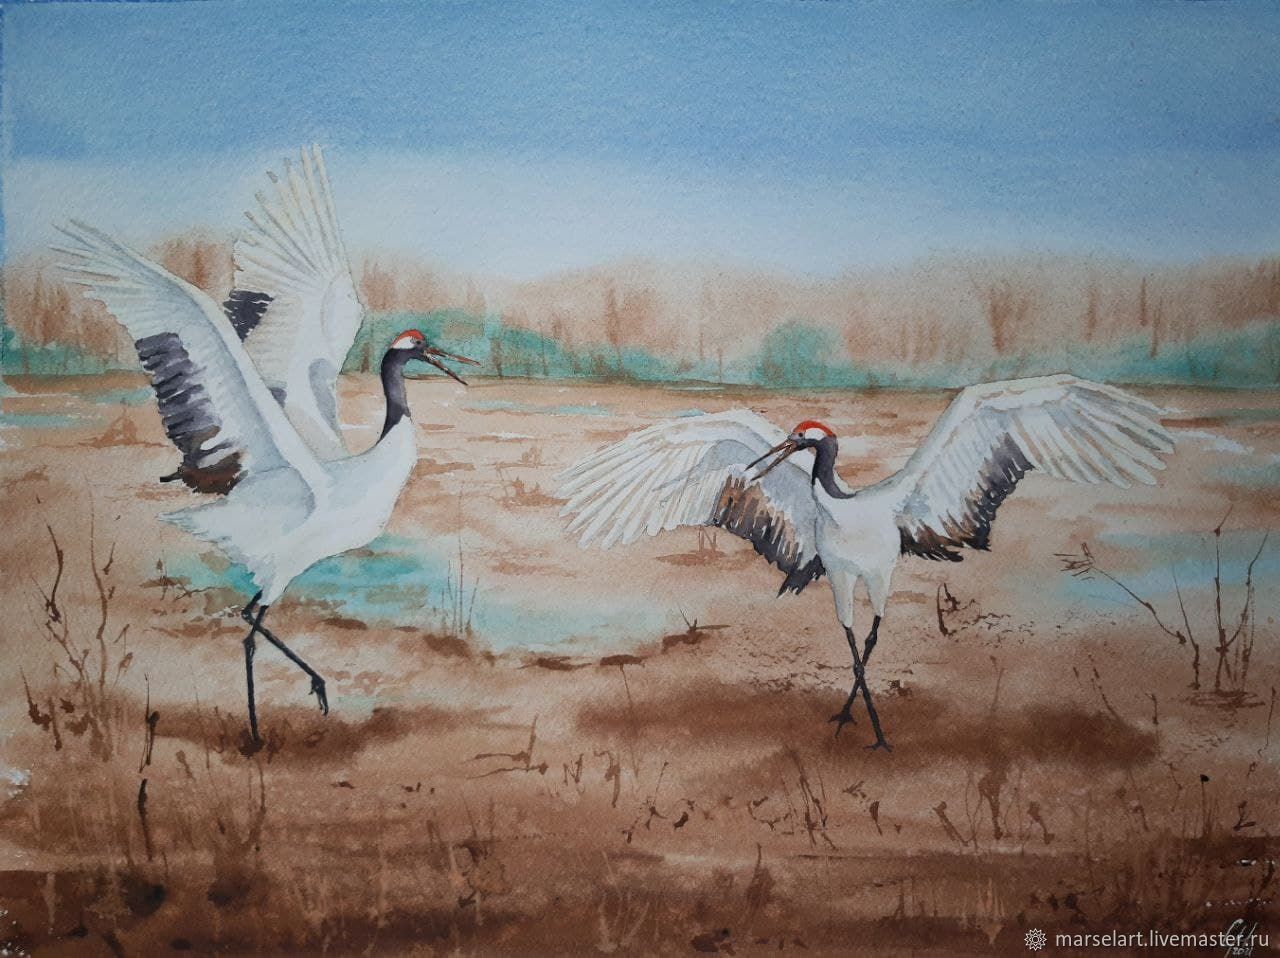  Dance of Japanese cranes watercolor painting, Pictures, Kemerovo,  Фото №1